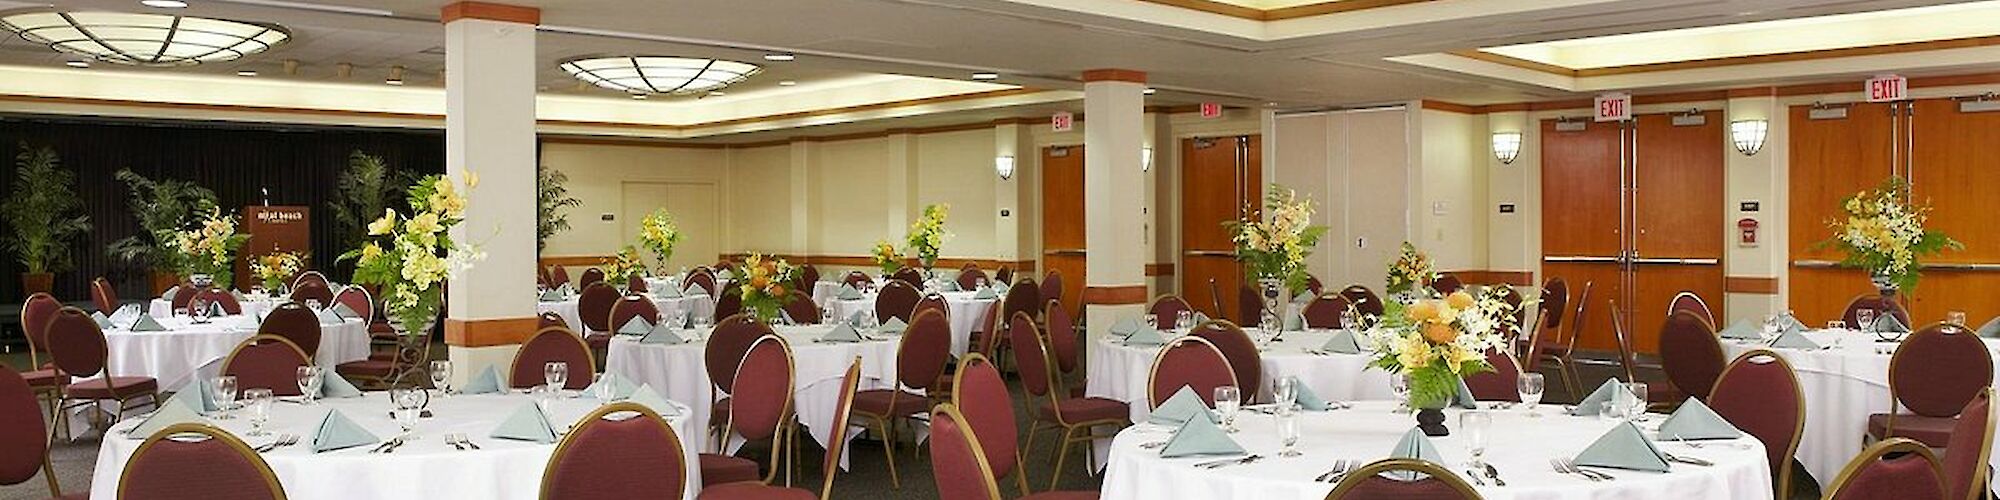 A banquet hall with round tables set for an event, featuring white tablecloths, arranged chairs, and floral centerpieces, under soft lighting.